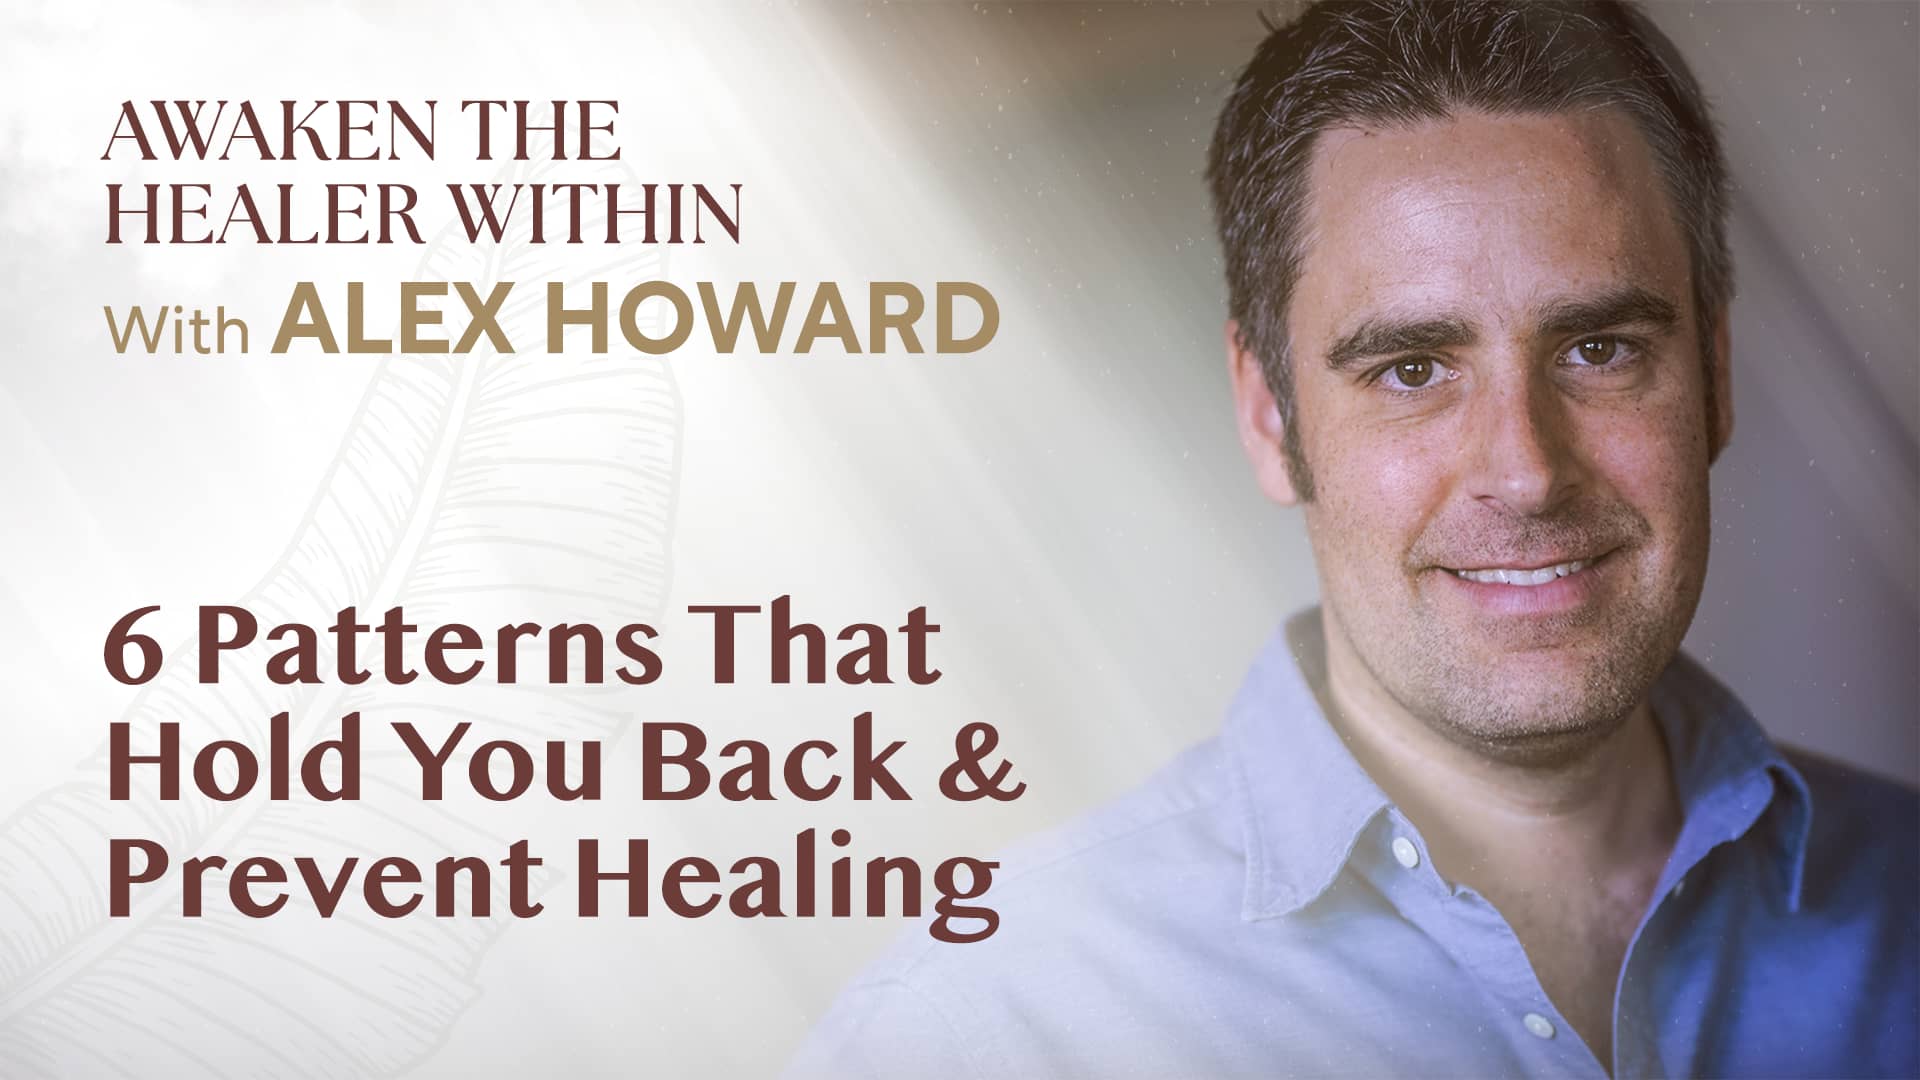 6 Patterns That Hold You Back & Prevent Healing